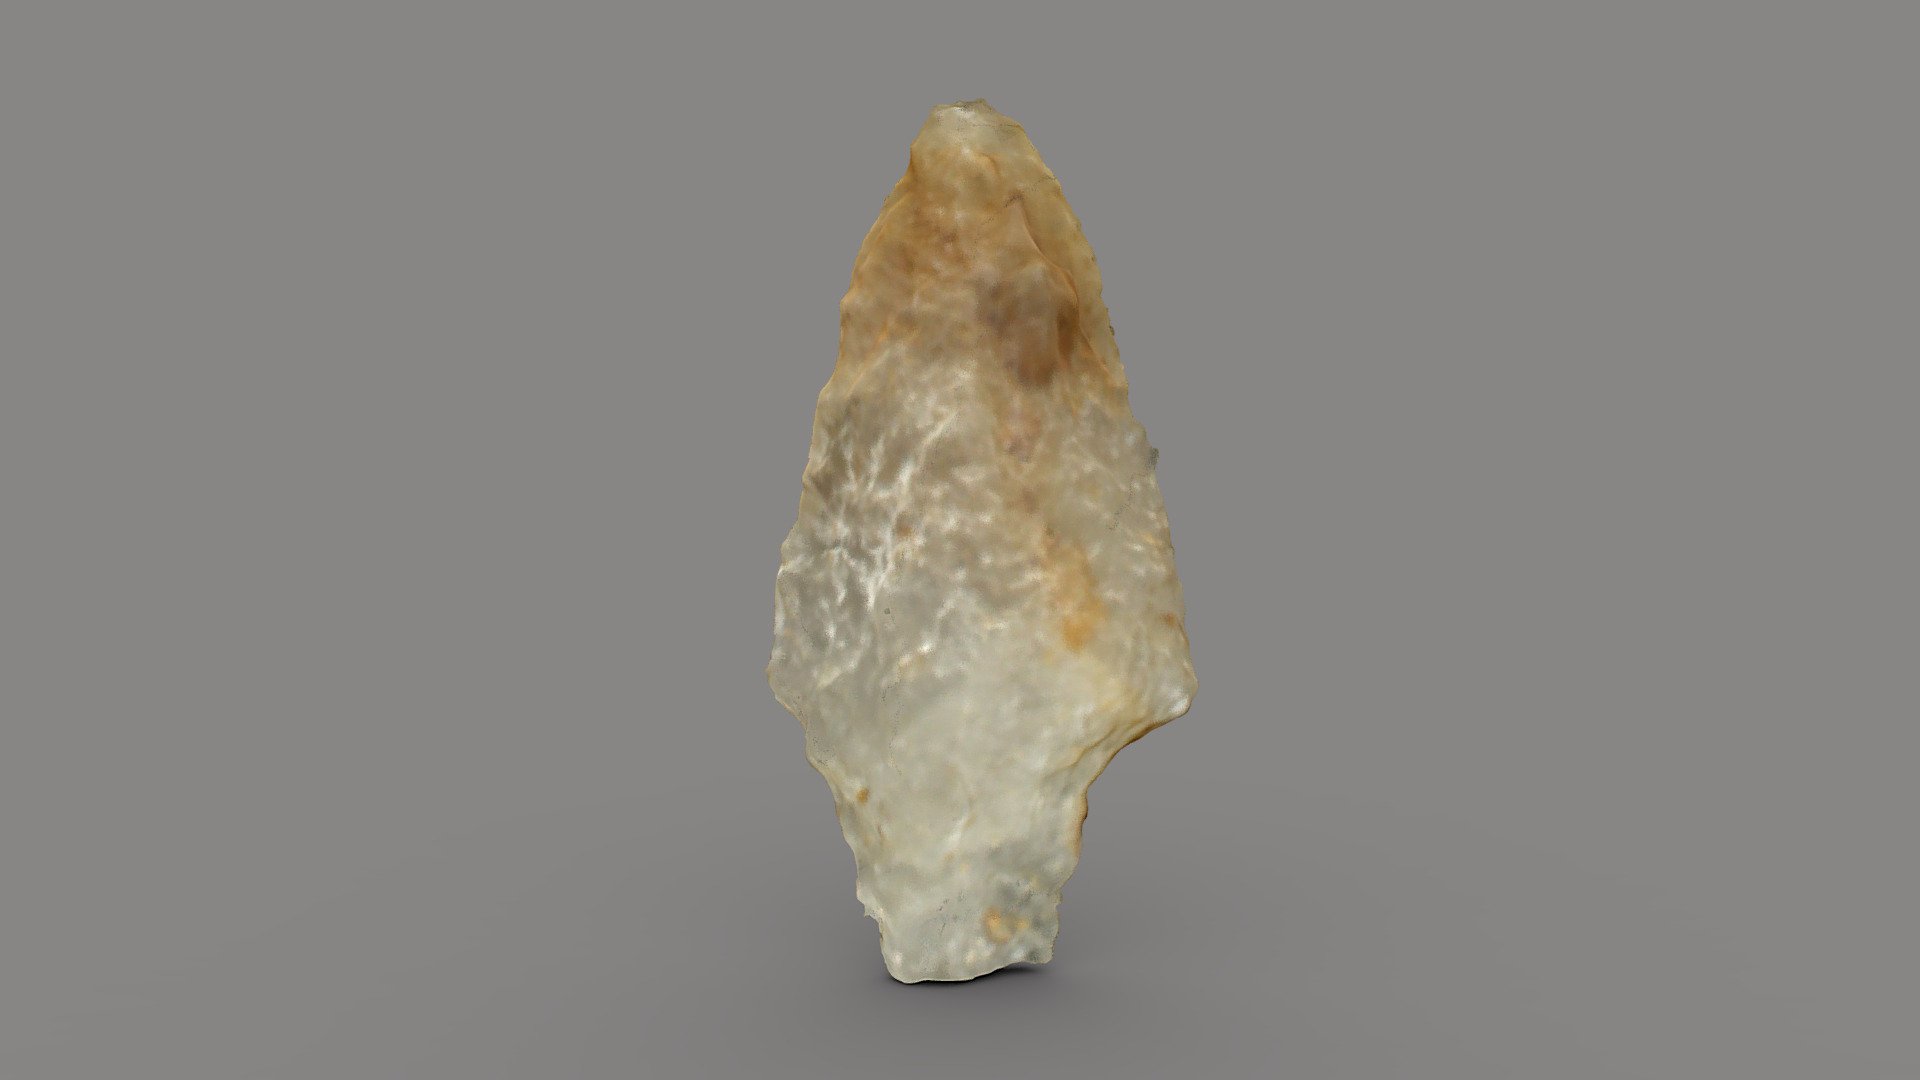 Lehigh/Koens-Crispin Projectile Point